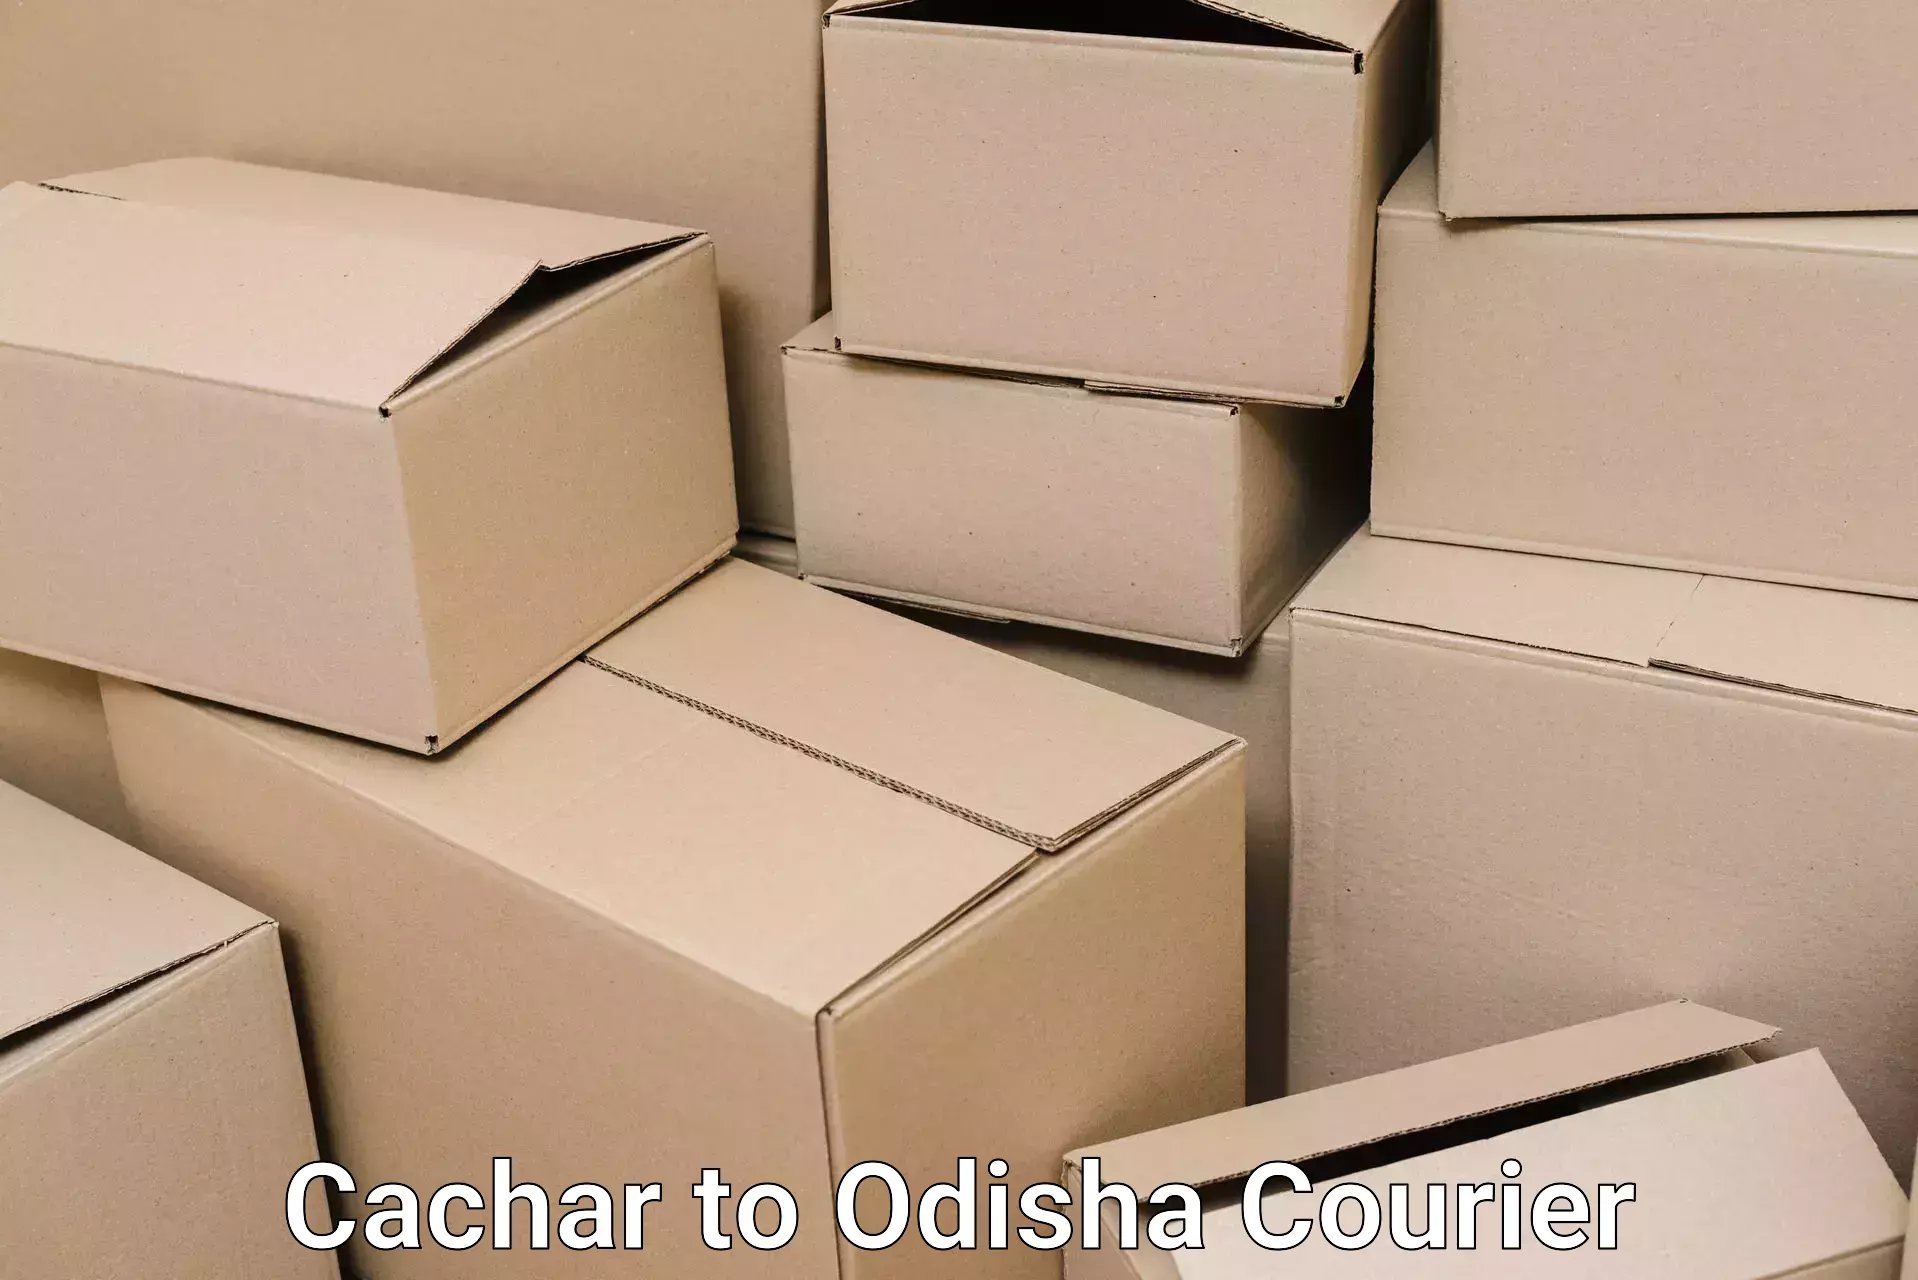 Expert goods movers Cachar to Jashipur